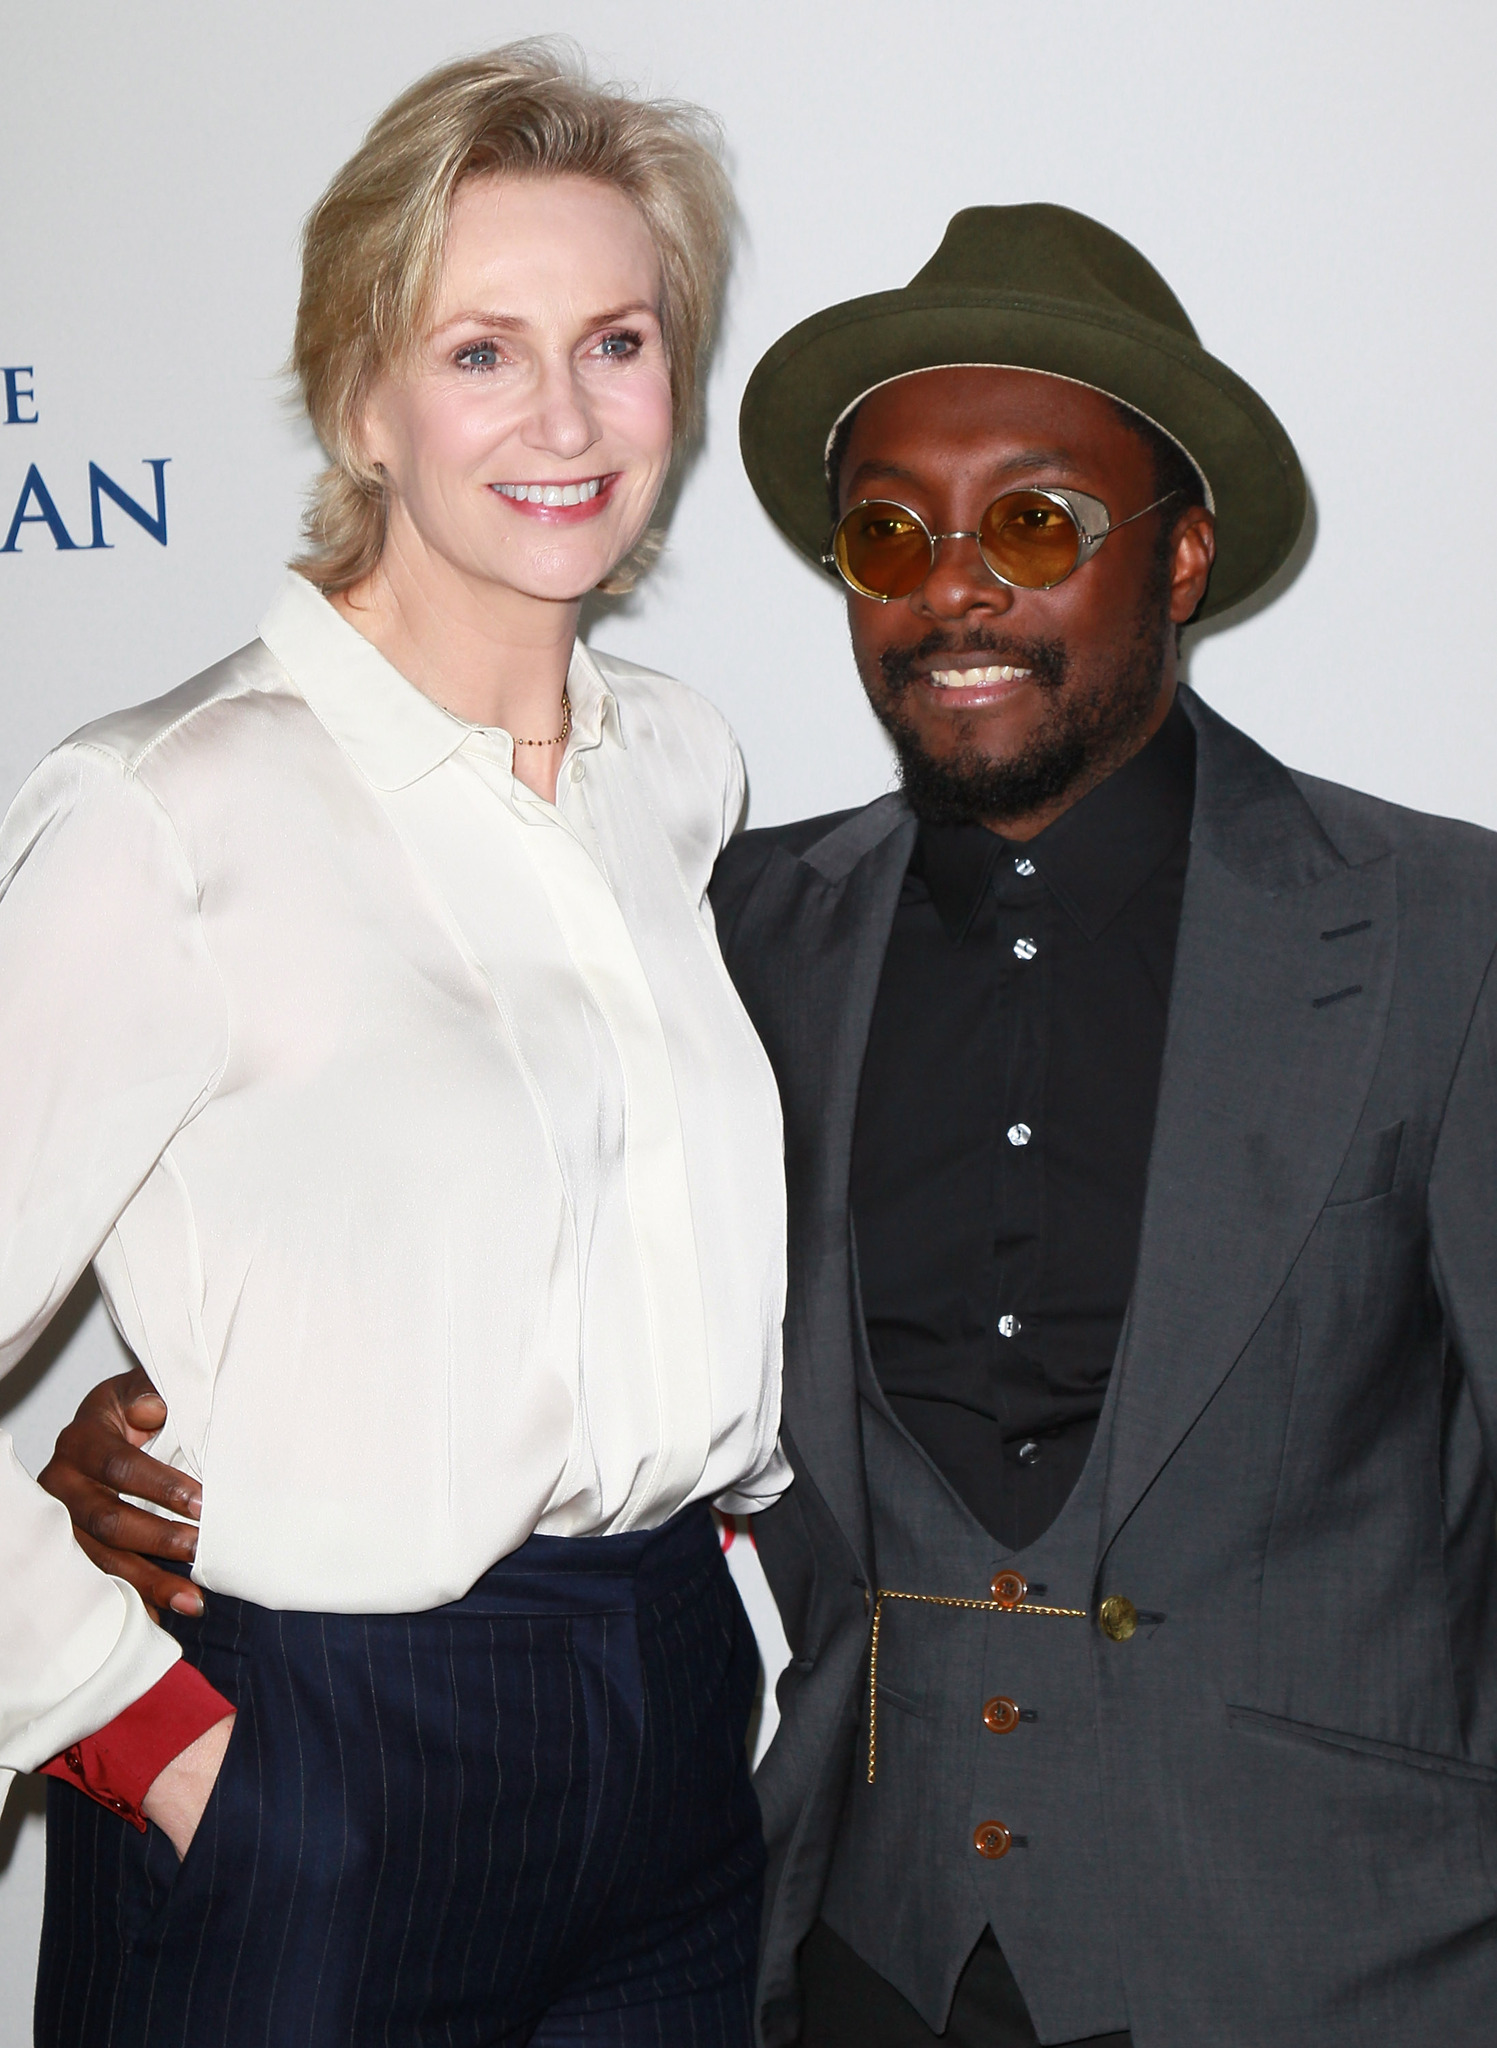 Jane Lynch and Will.i.am